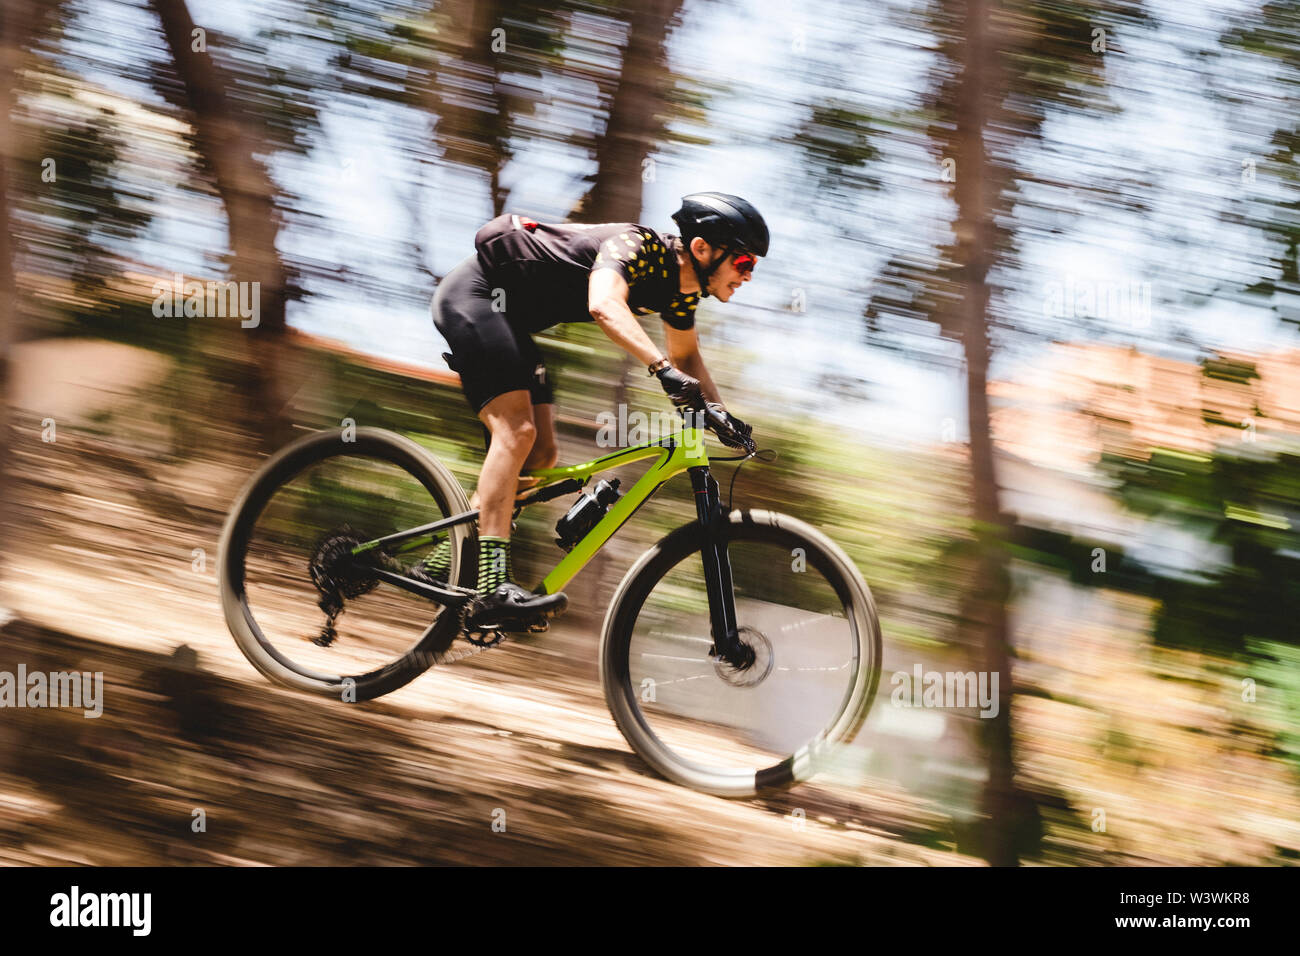 Speed blur of male mountain bike cyclist going downhill Stock Photo